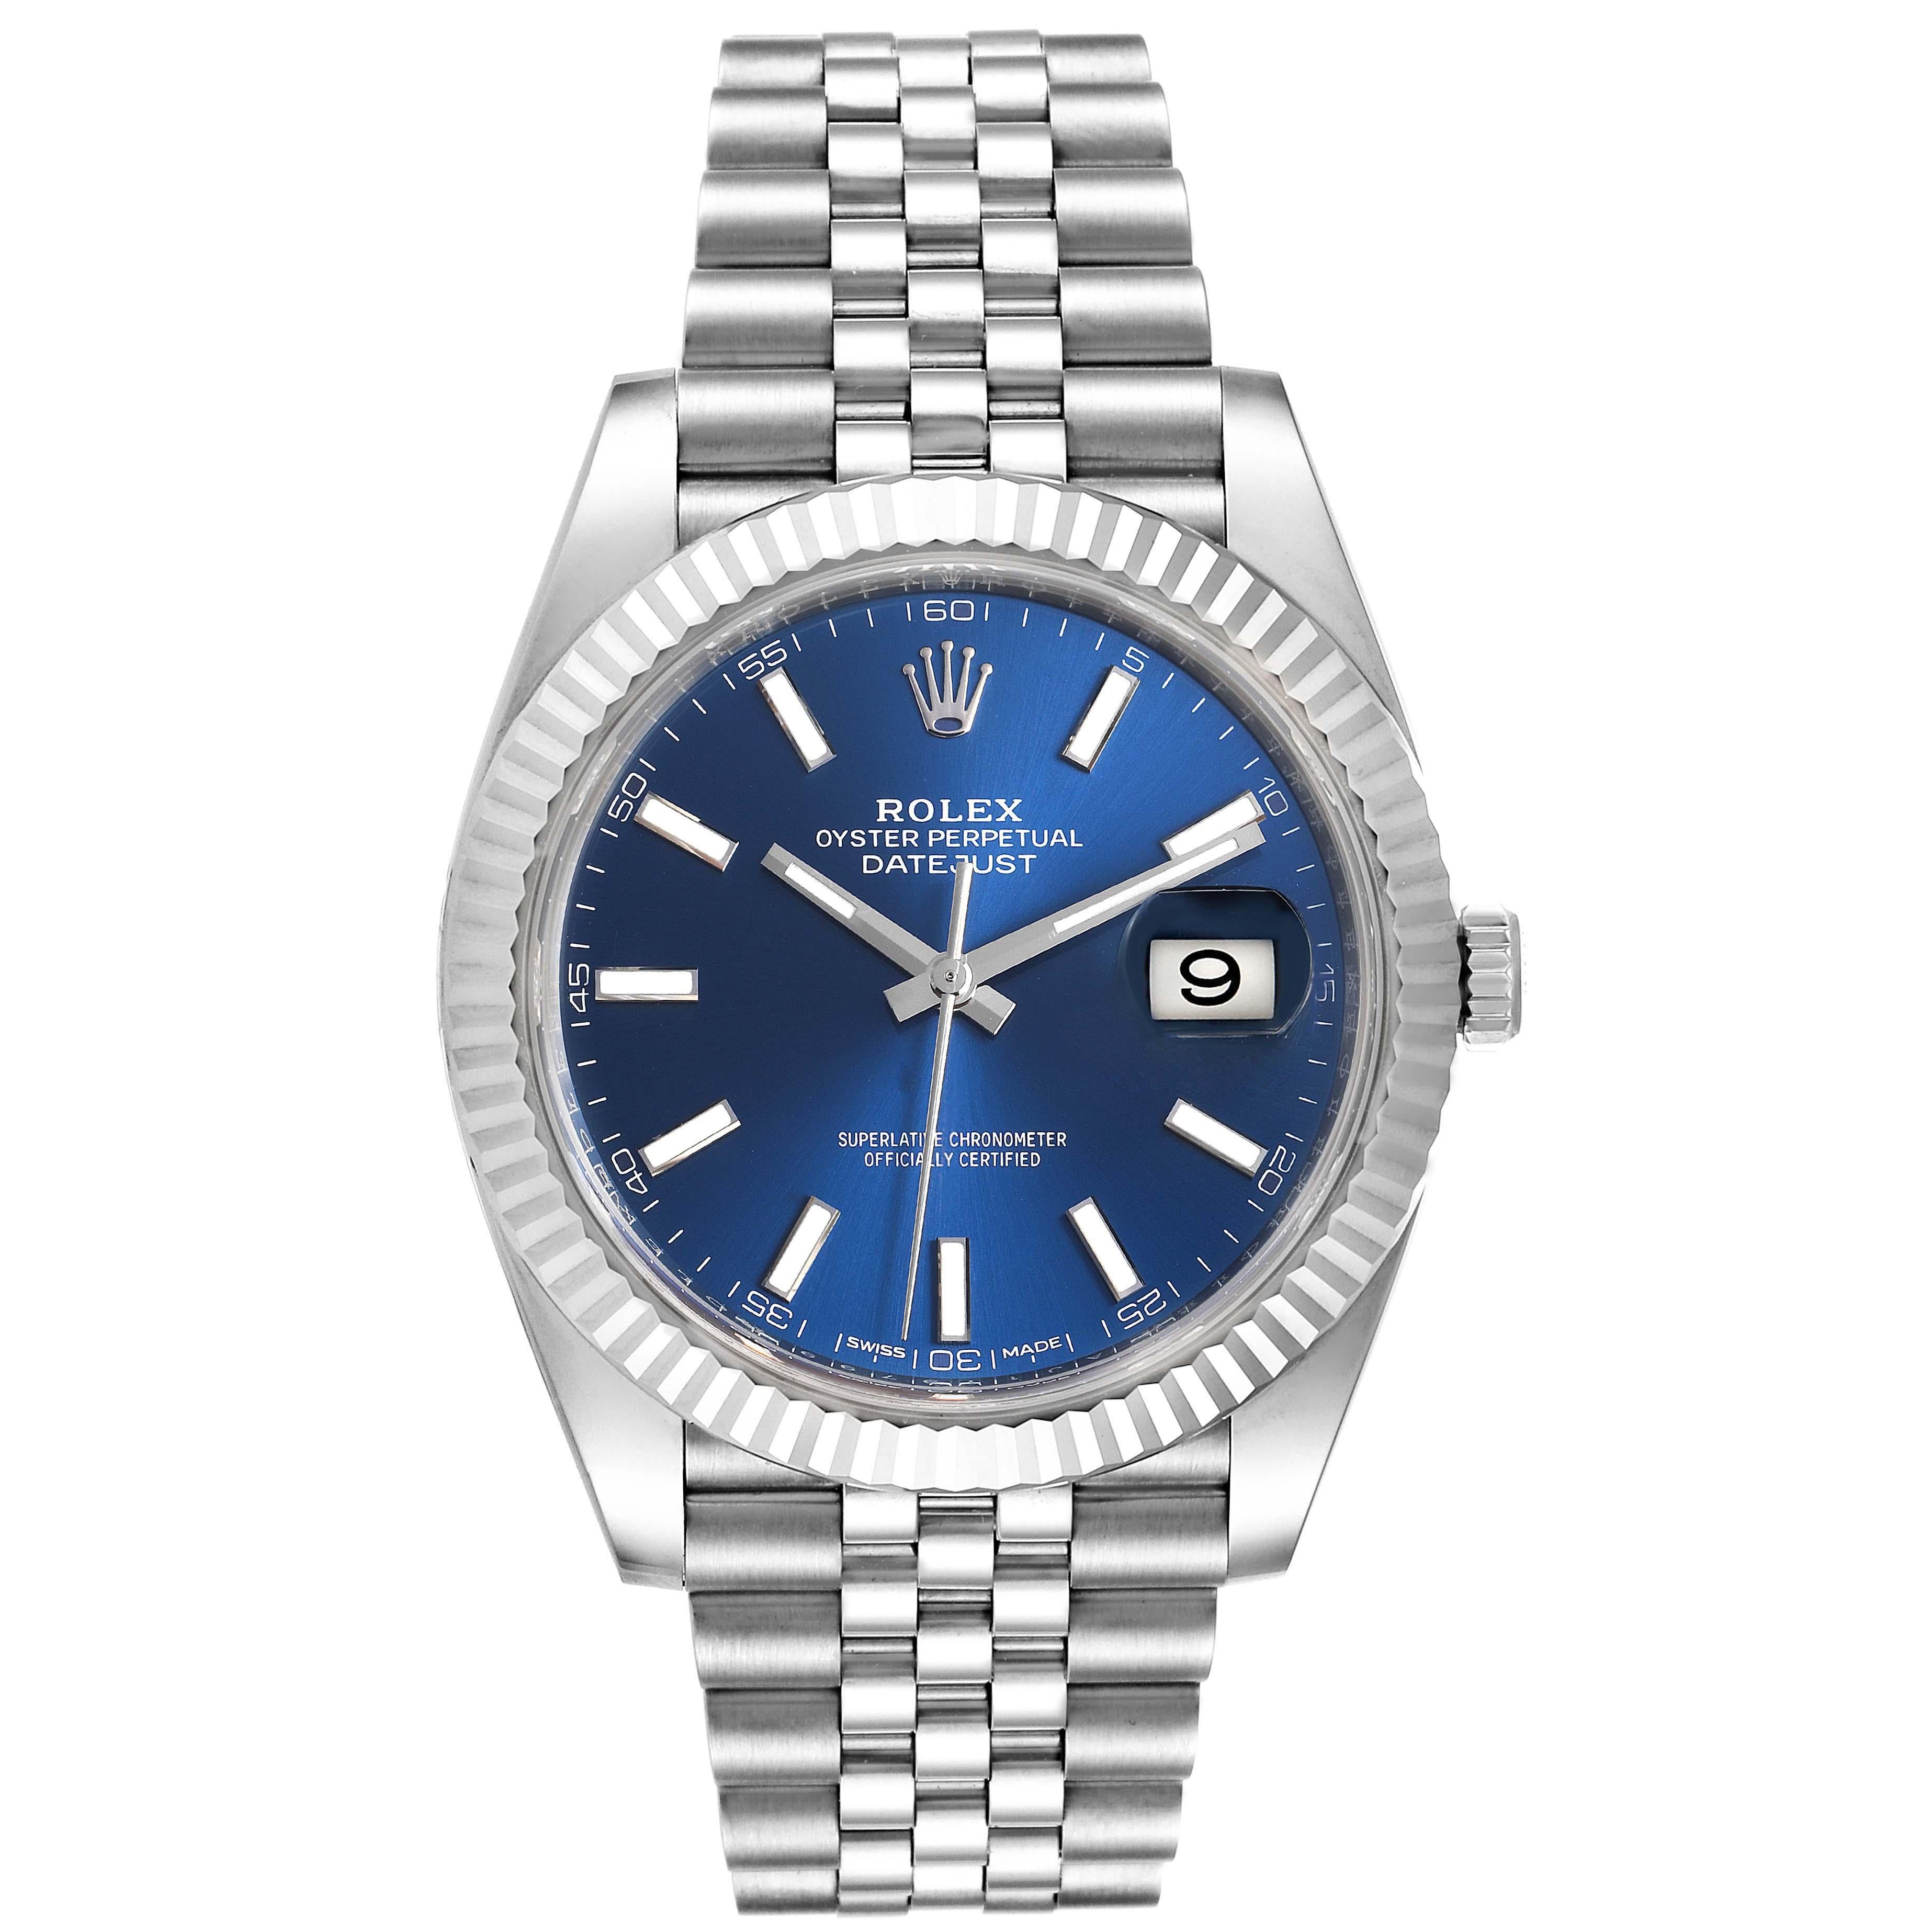 Rolex Datejust 41 Steel White Gold Blue Dial Steel Mens Watch 126334. Officially certified chronometer automatic self-winding movement. Stainless steel case 41 mm in diameter. Rolex logo on a crown. 18K white gold fluted bezel. Scratch resistant